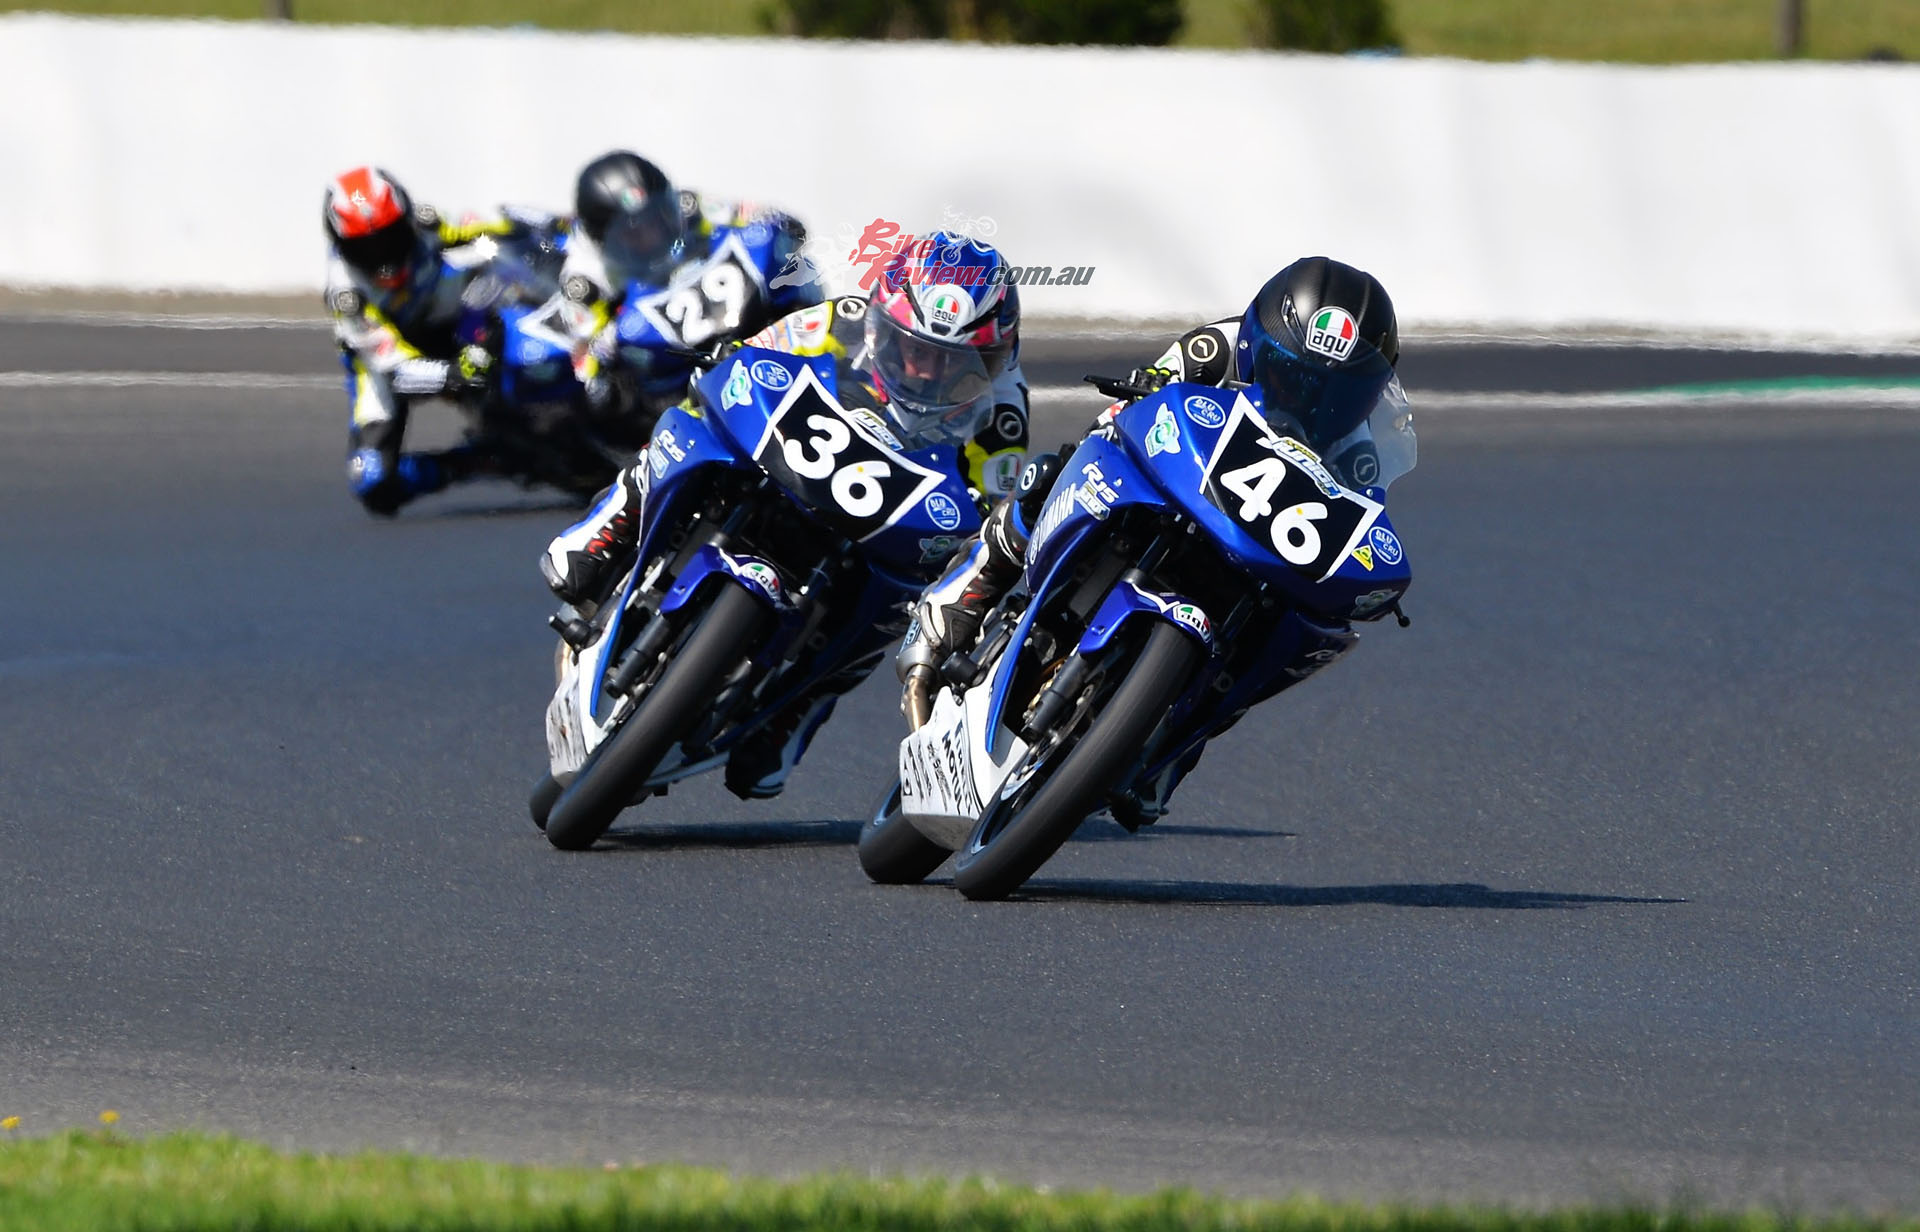 All categories from the OJC to the Superbike class will be at the Island battling it out for the first points of the season.